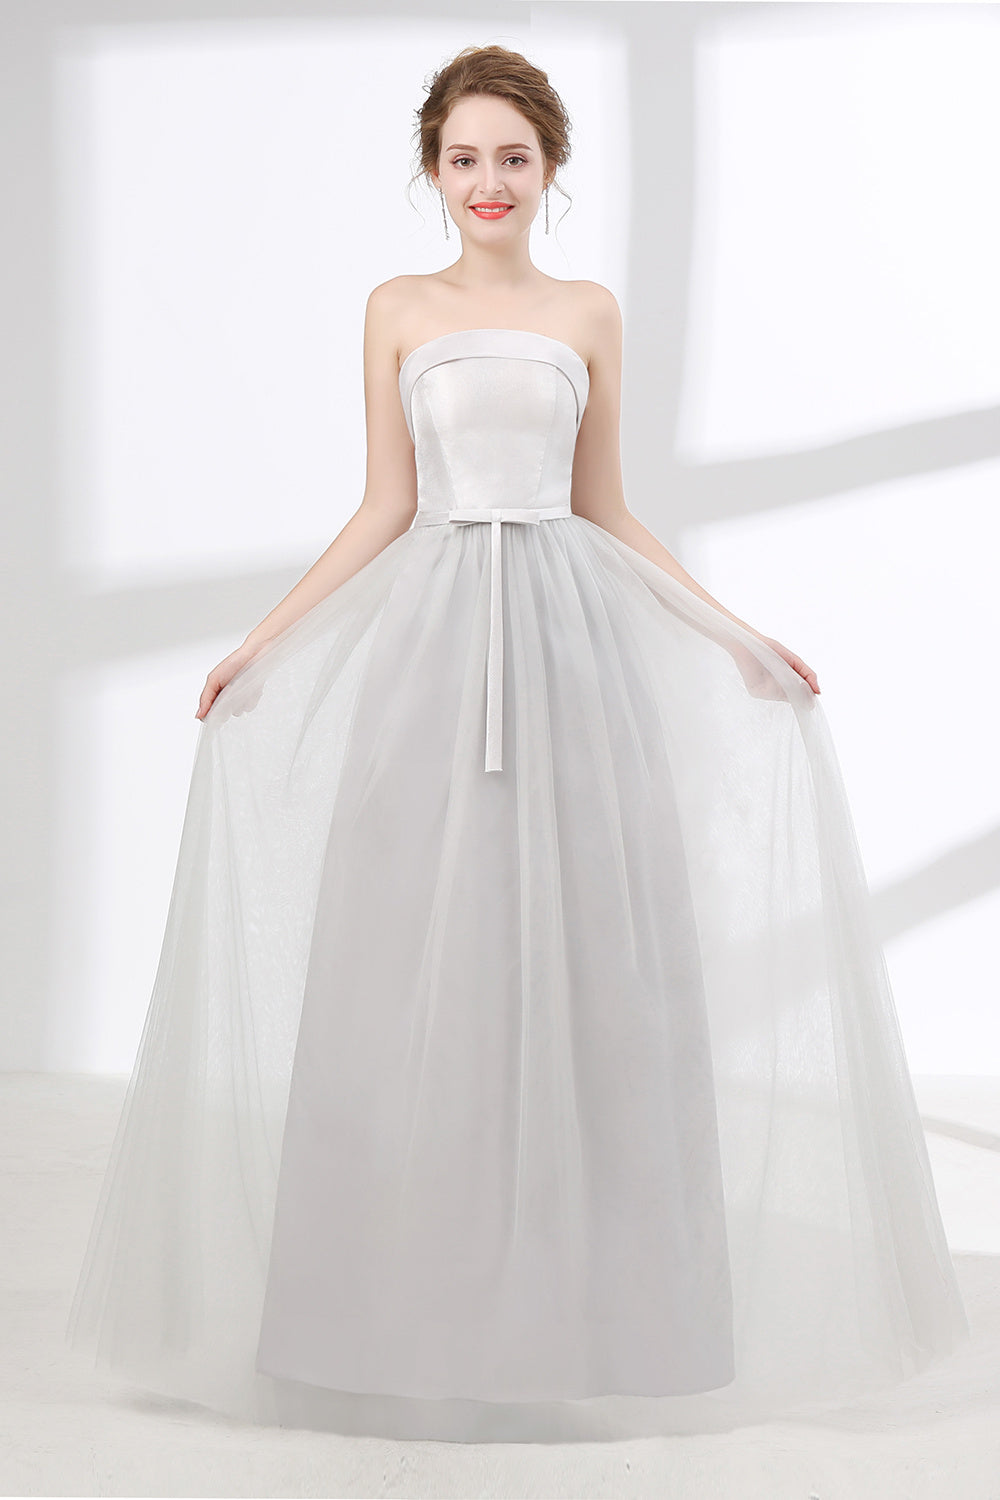 Tulle & Satin Strapless Neckline A-line Bridesmaid Dresses With Bowknot